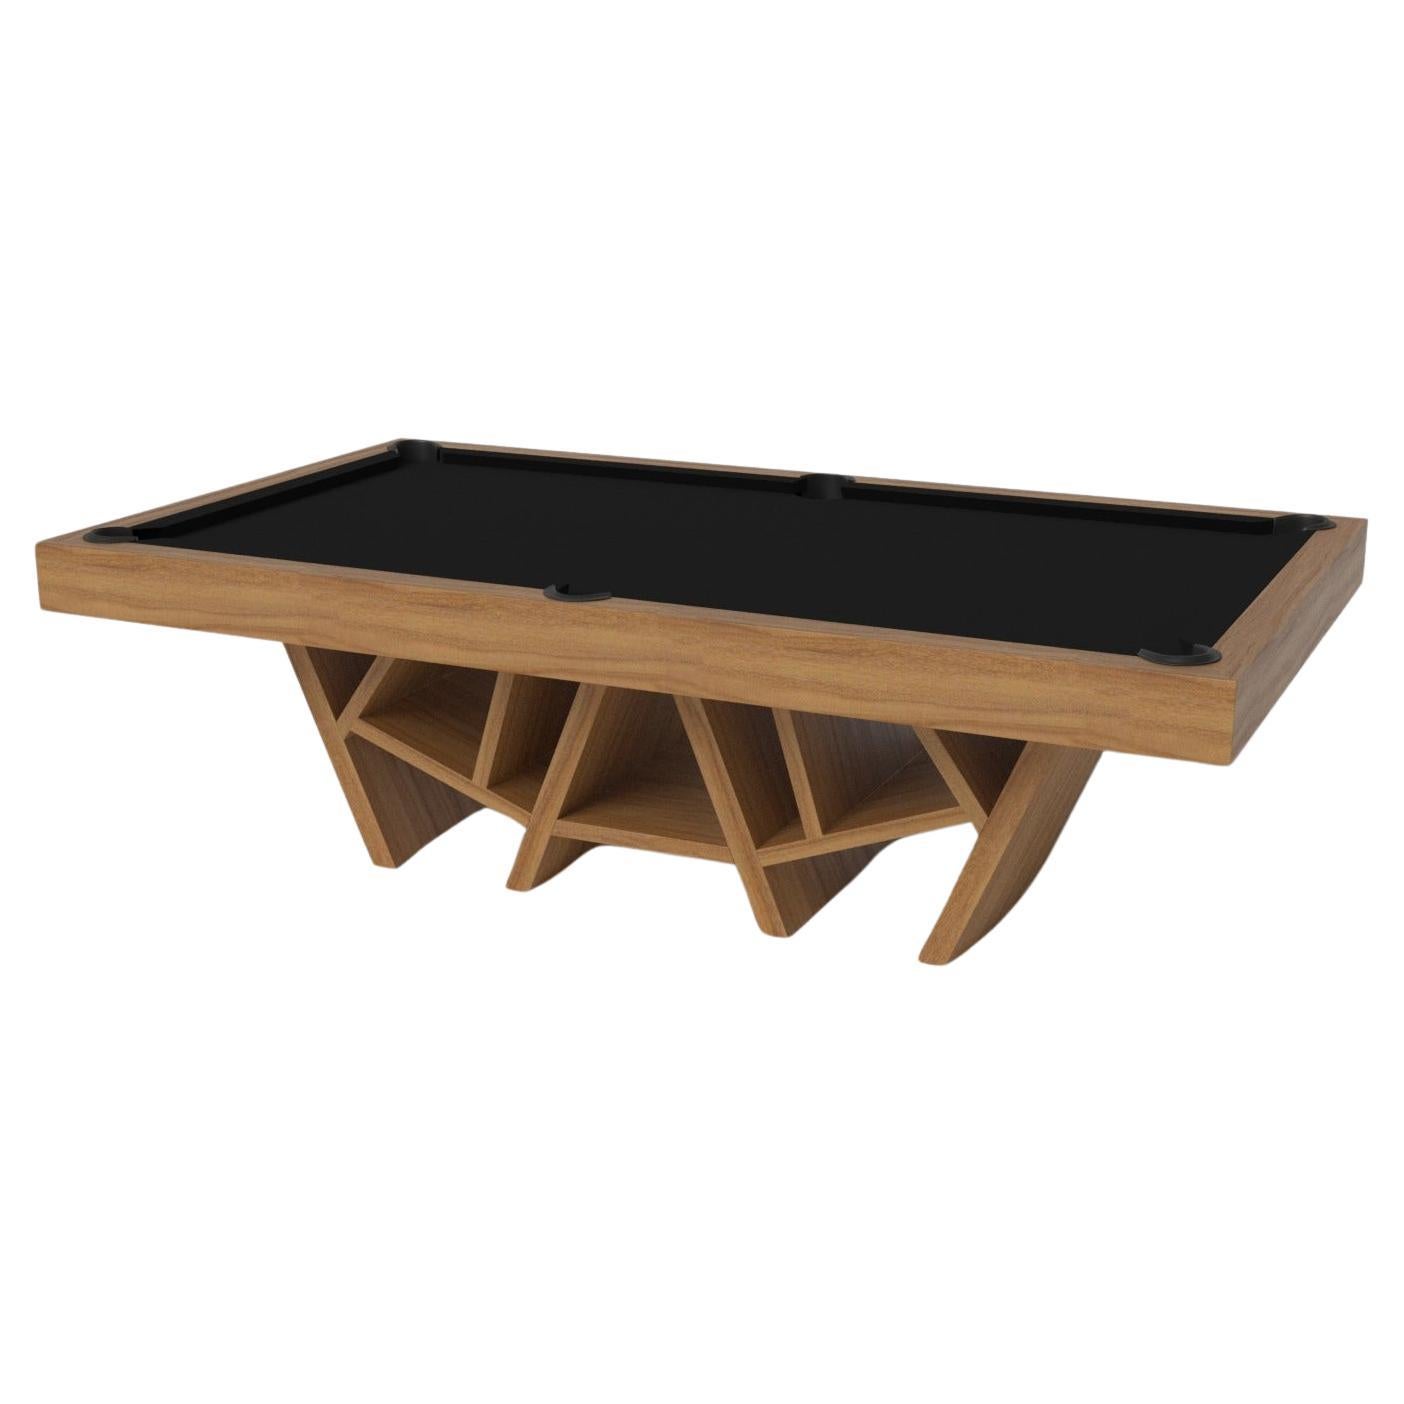 Elevate Customs Maze Pool Table / Solid Teak Wood in 9' - Made in USA